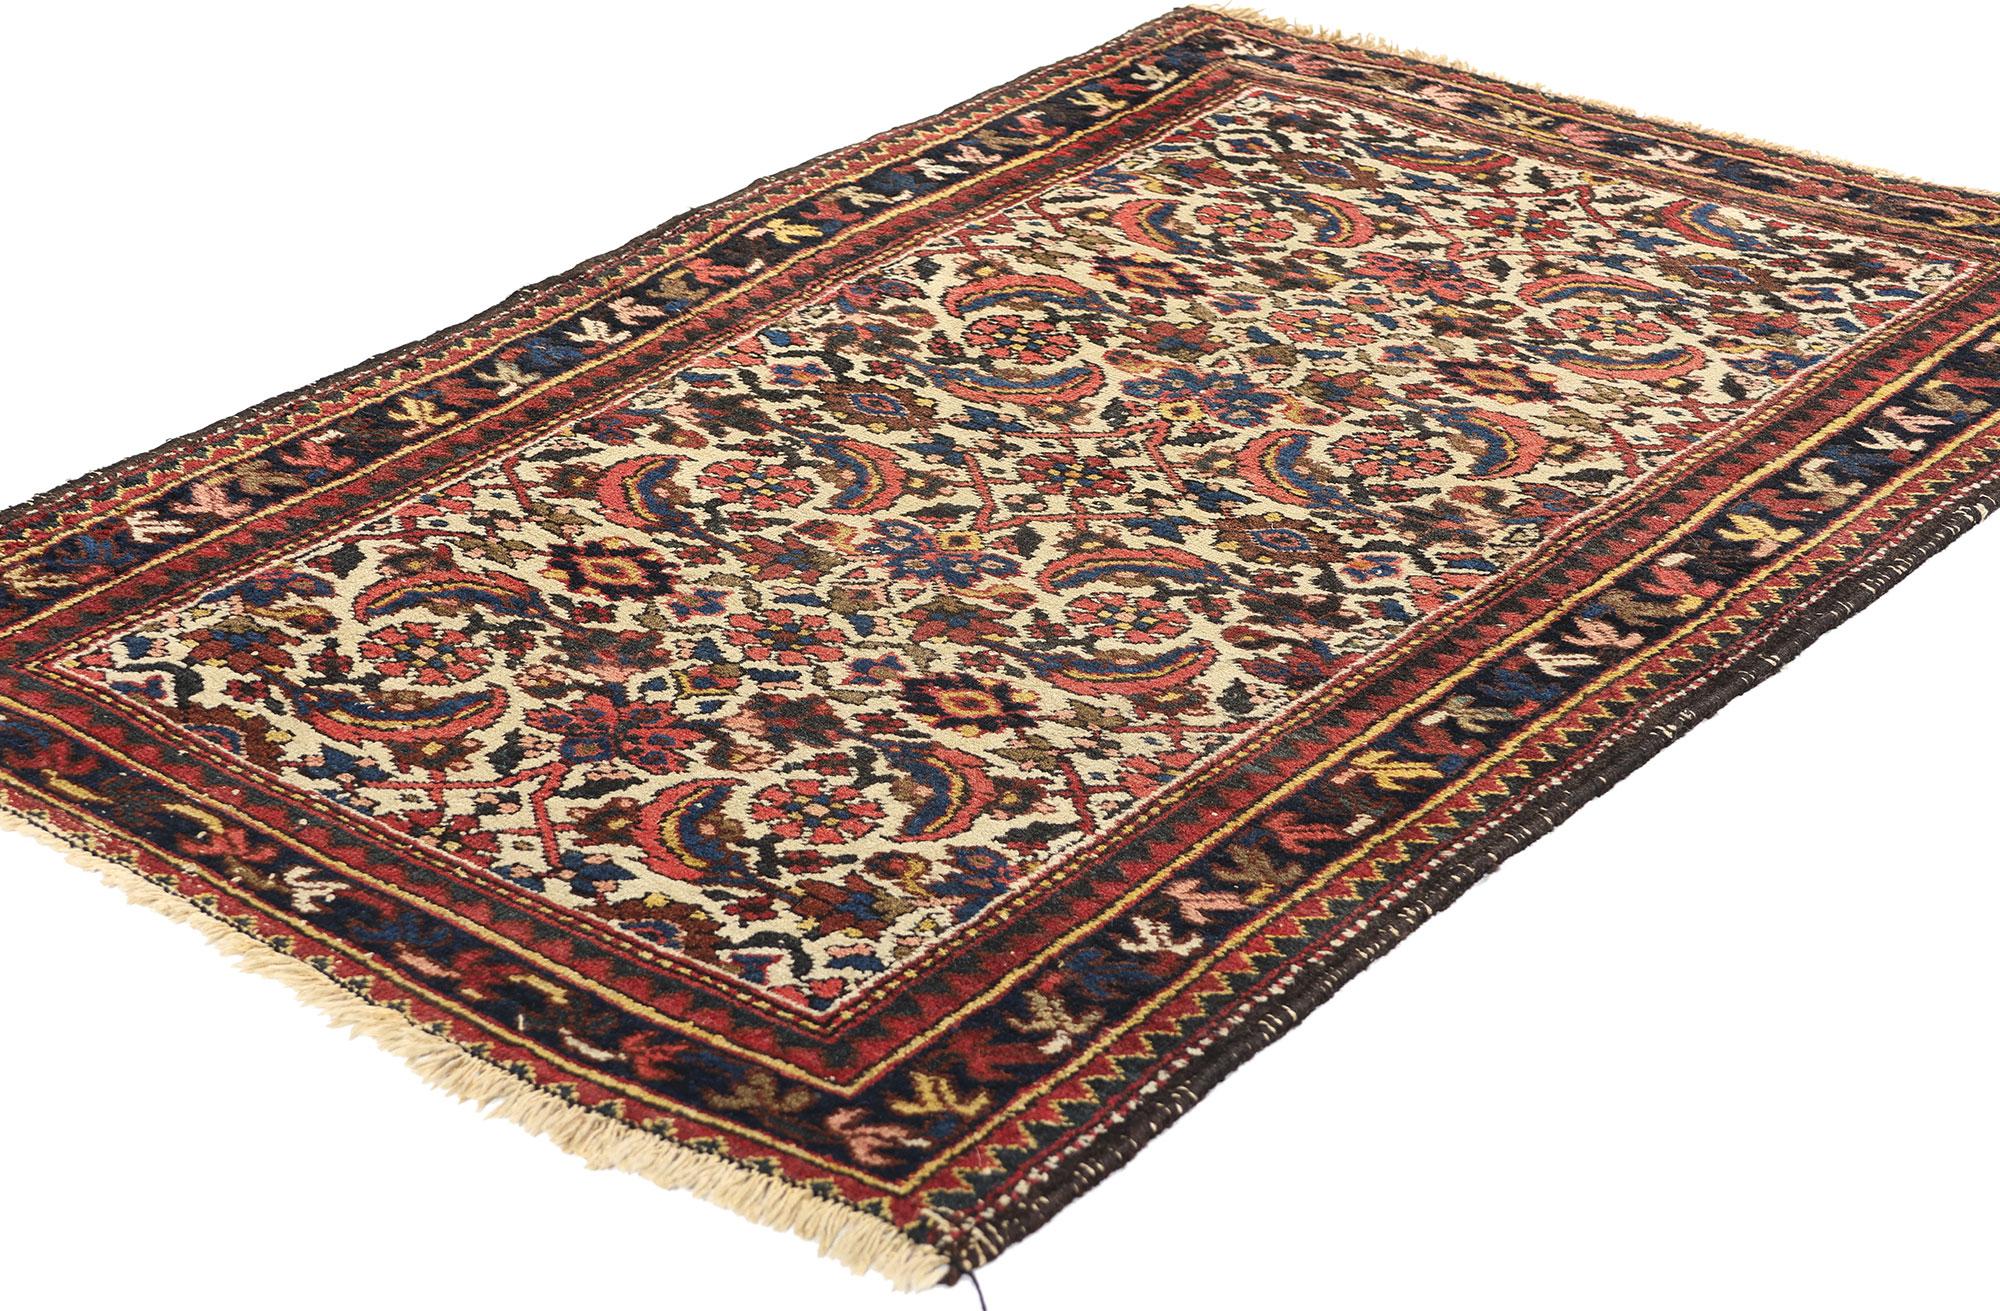 78419 Antique Ivory Persian Hamadan Rug, 02'07 x 04'00. Persian Hamadan rugs are a type of handwoven rug originating from the Hamadan region of Iran. Known for their rich history and exquisite craftsmanship, Hamadan rugs come in a variety of styles